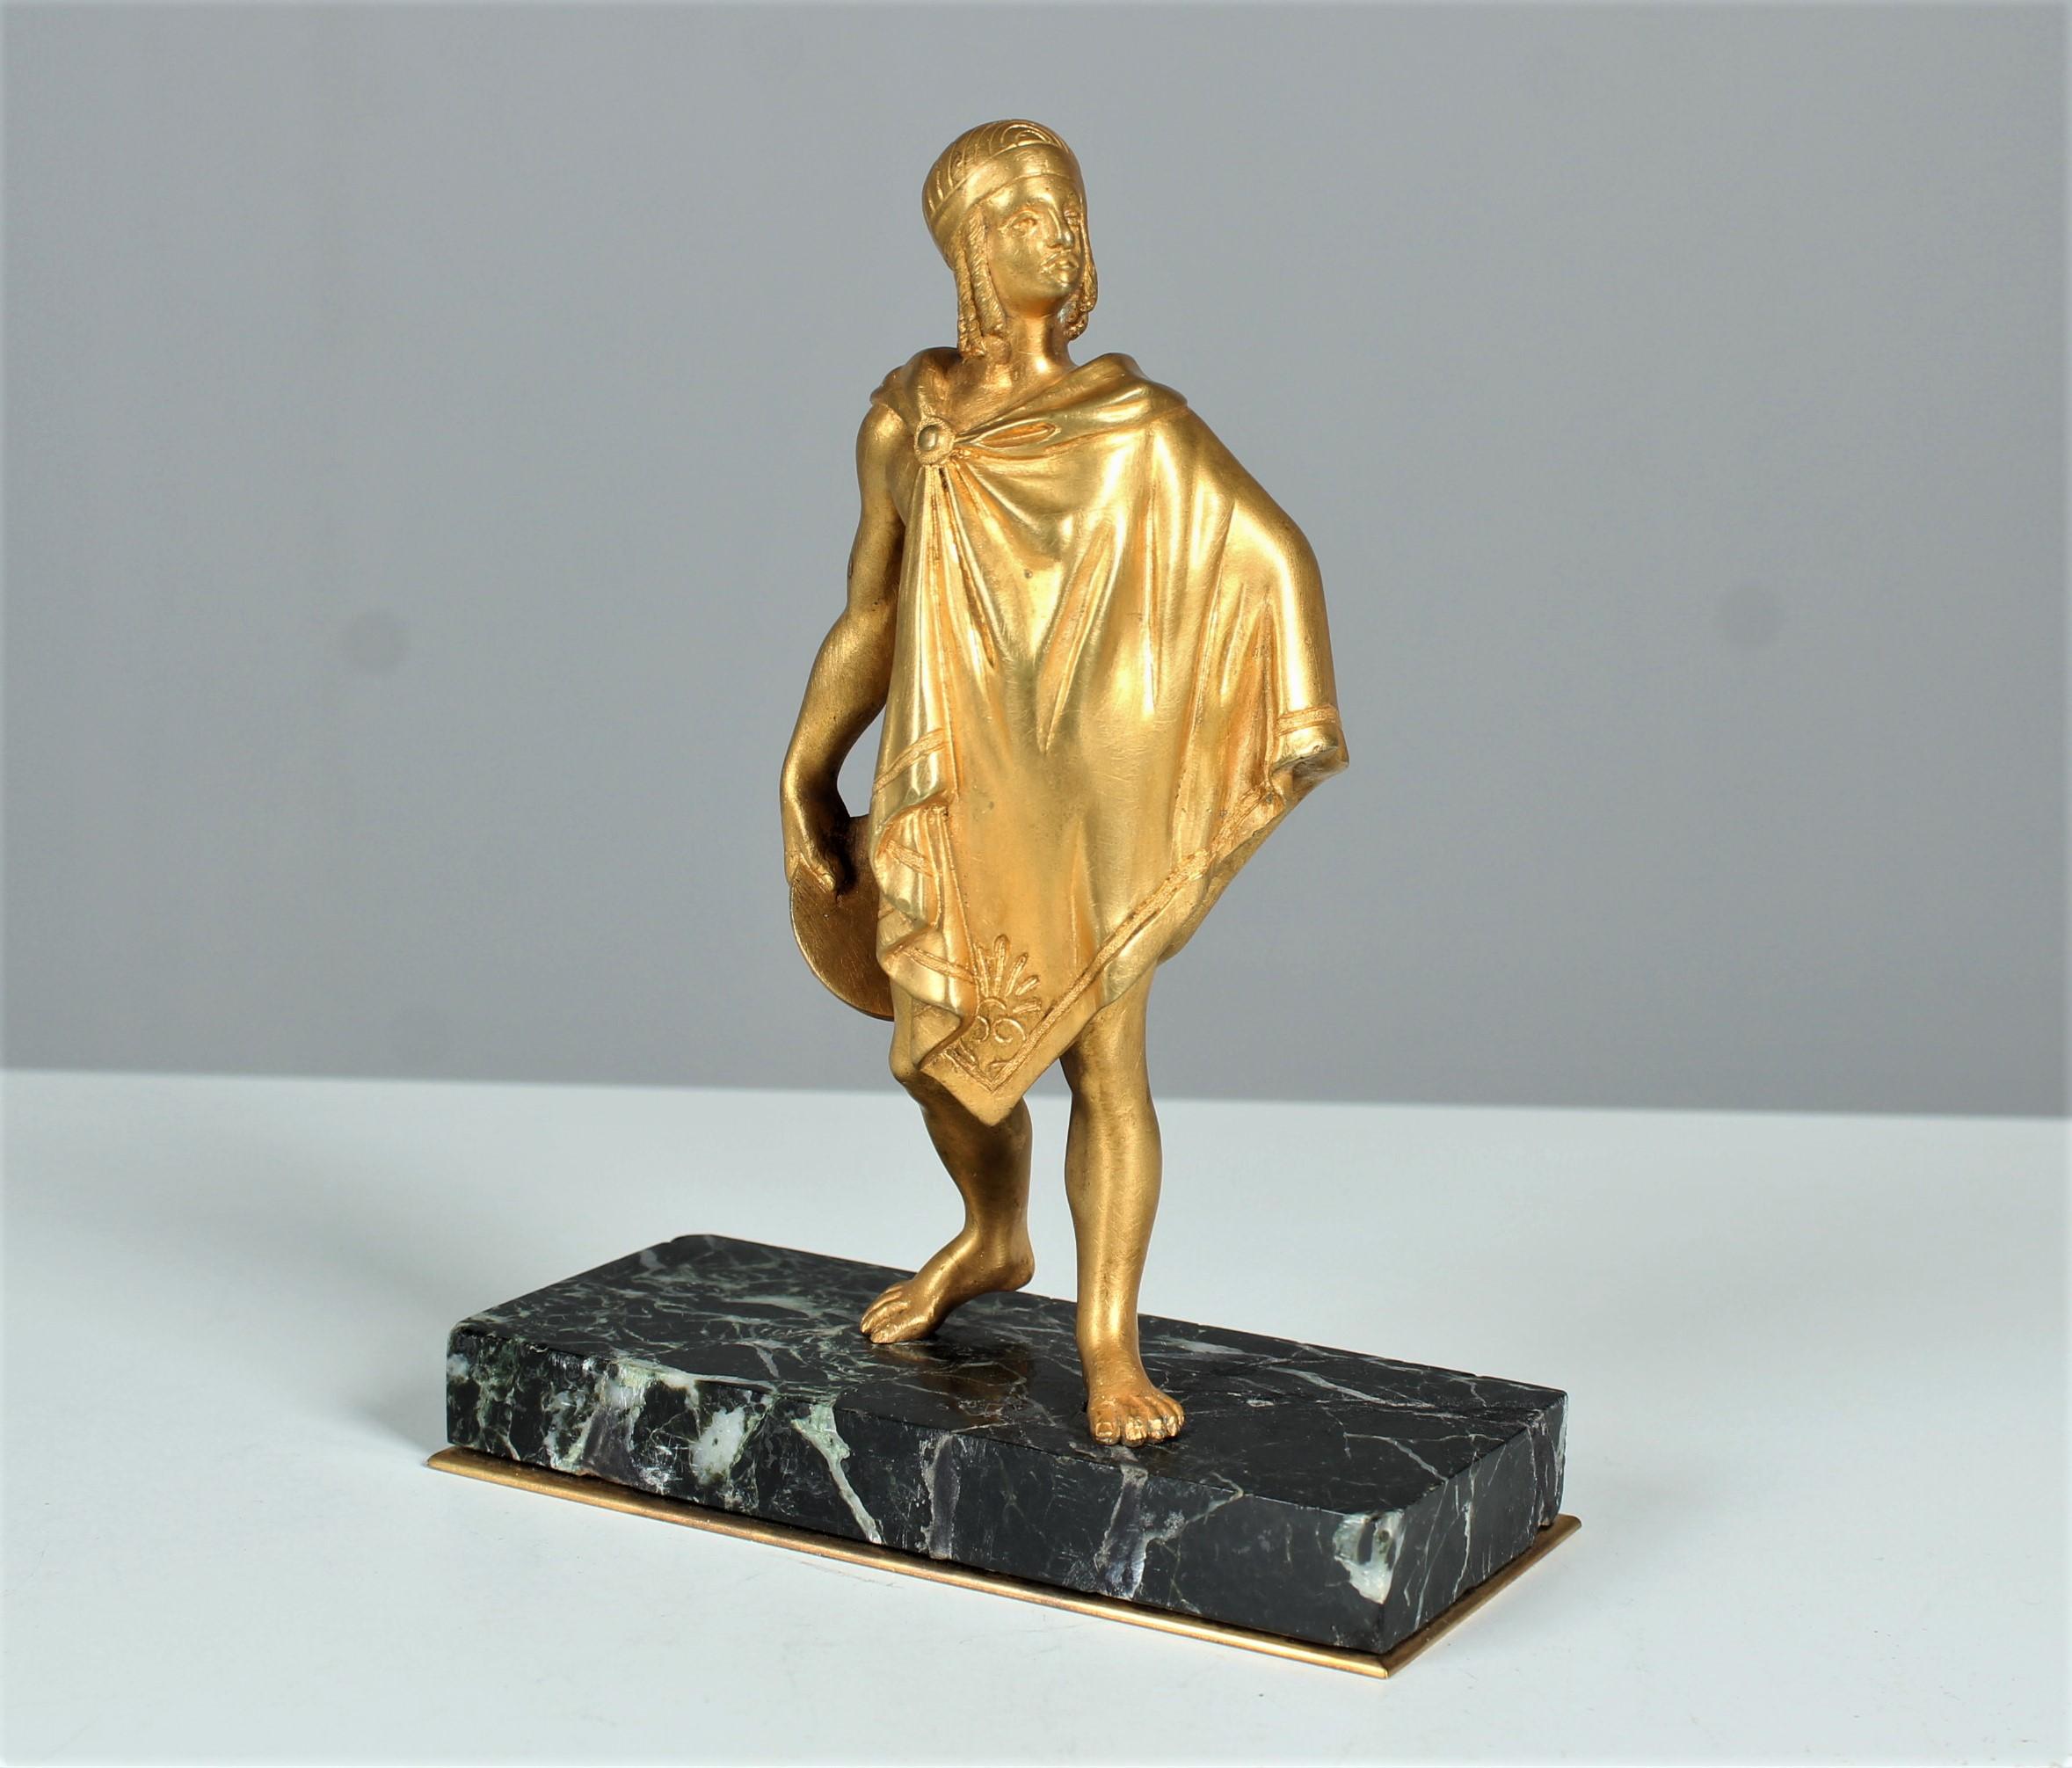 Beautiful antique sculpture by the french artist Édouard Drouot (* 3. April 1859, Sommevoire, France - 22. Mai 1945, Paris, France).
Beautifully crafted and gilded bronze on a marble base.
Signed on the backside of the cape 